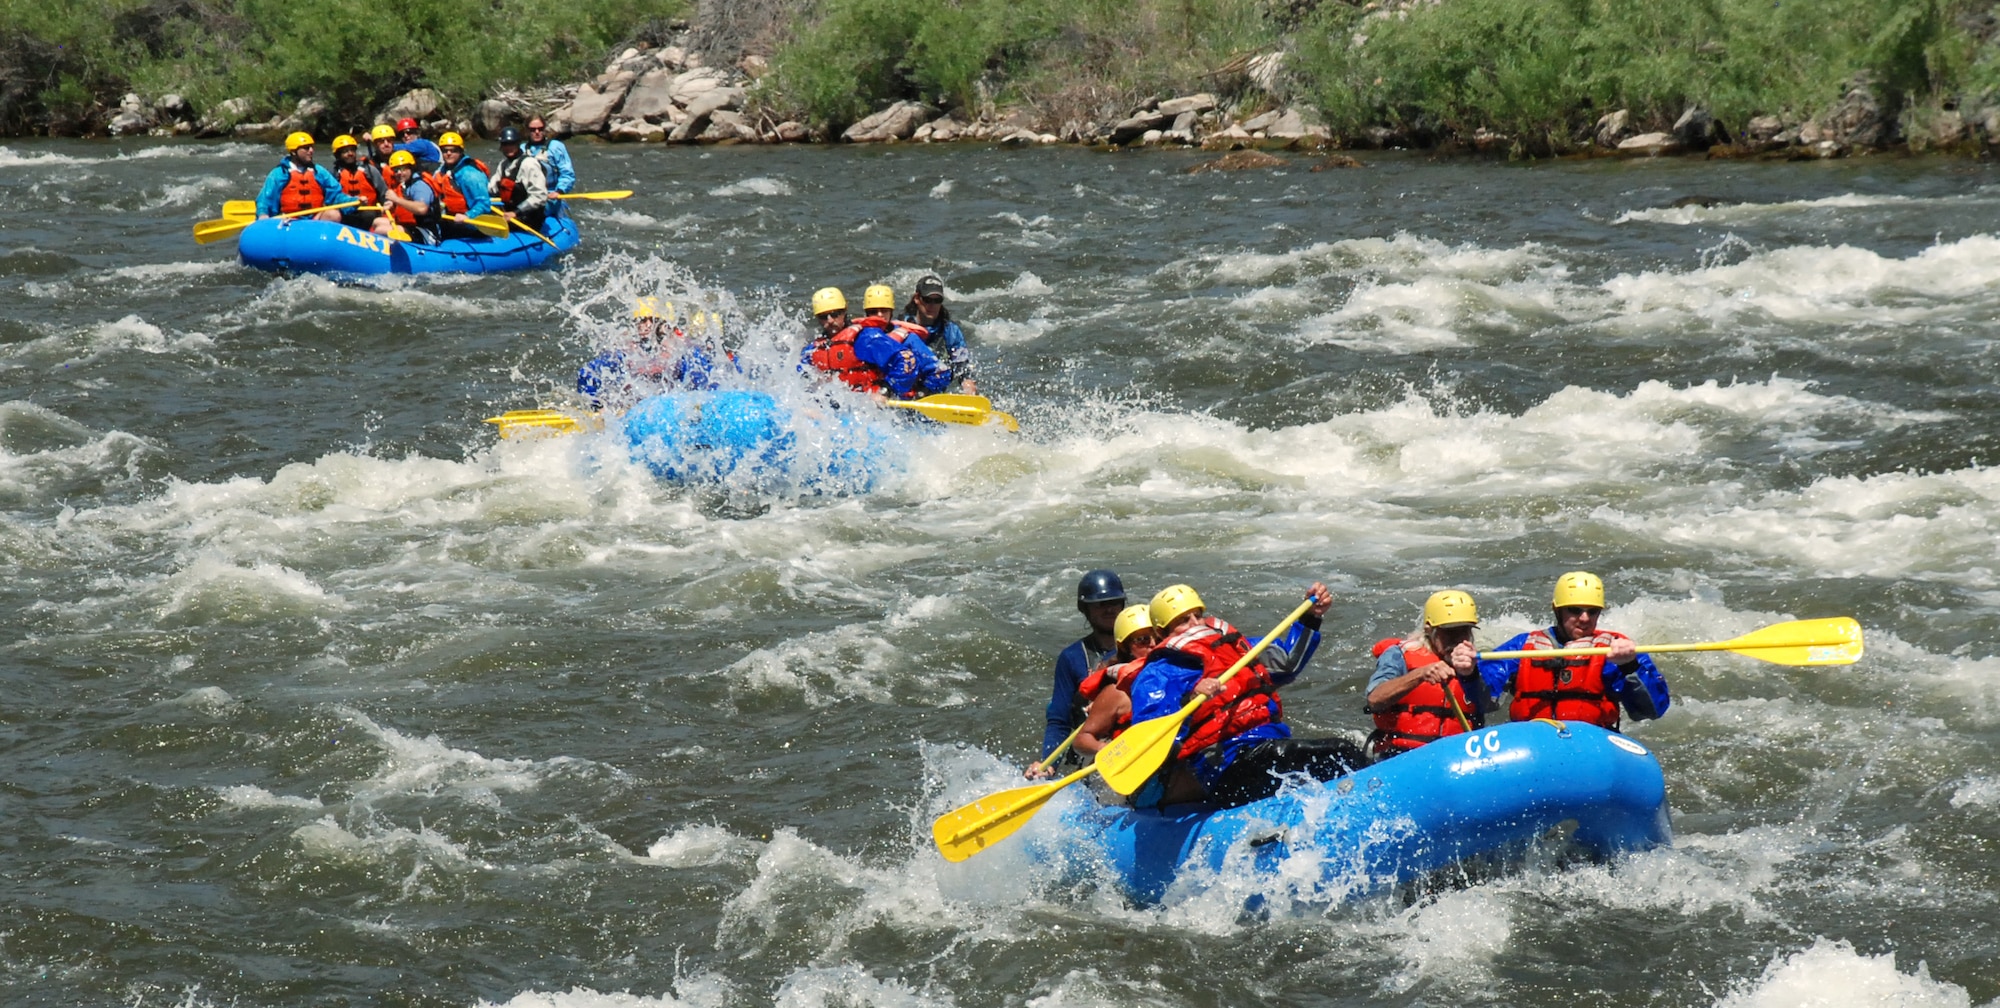 Rafters in Chaffee County, Colo., take to the white waters of the Arkansas River June 11. Snowmelt powers the river from May through late June, creating rapids that vary in difficulty from Class 2 to Class 4. (U.S. Air Force photo/Ann Patton)